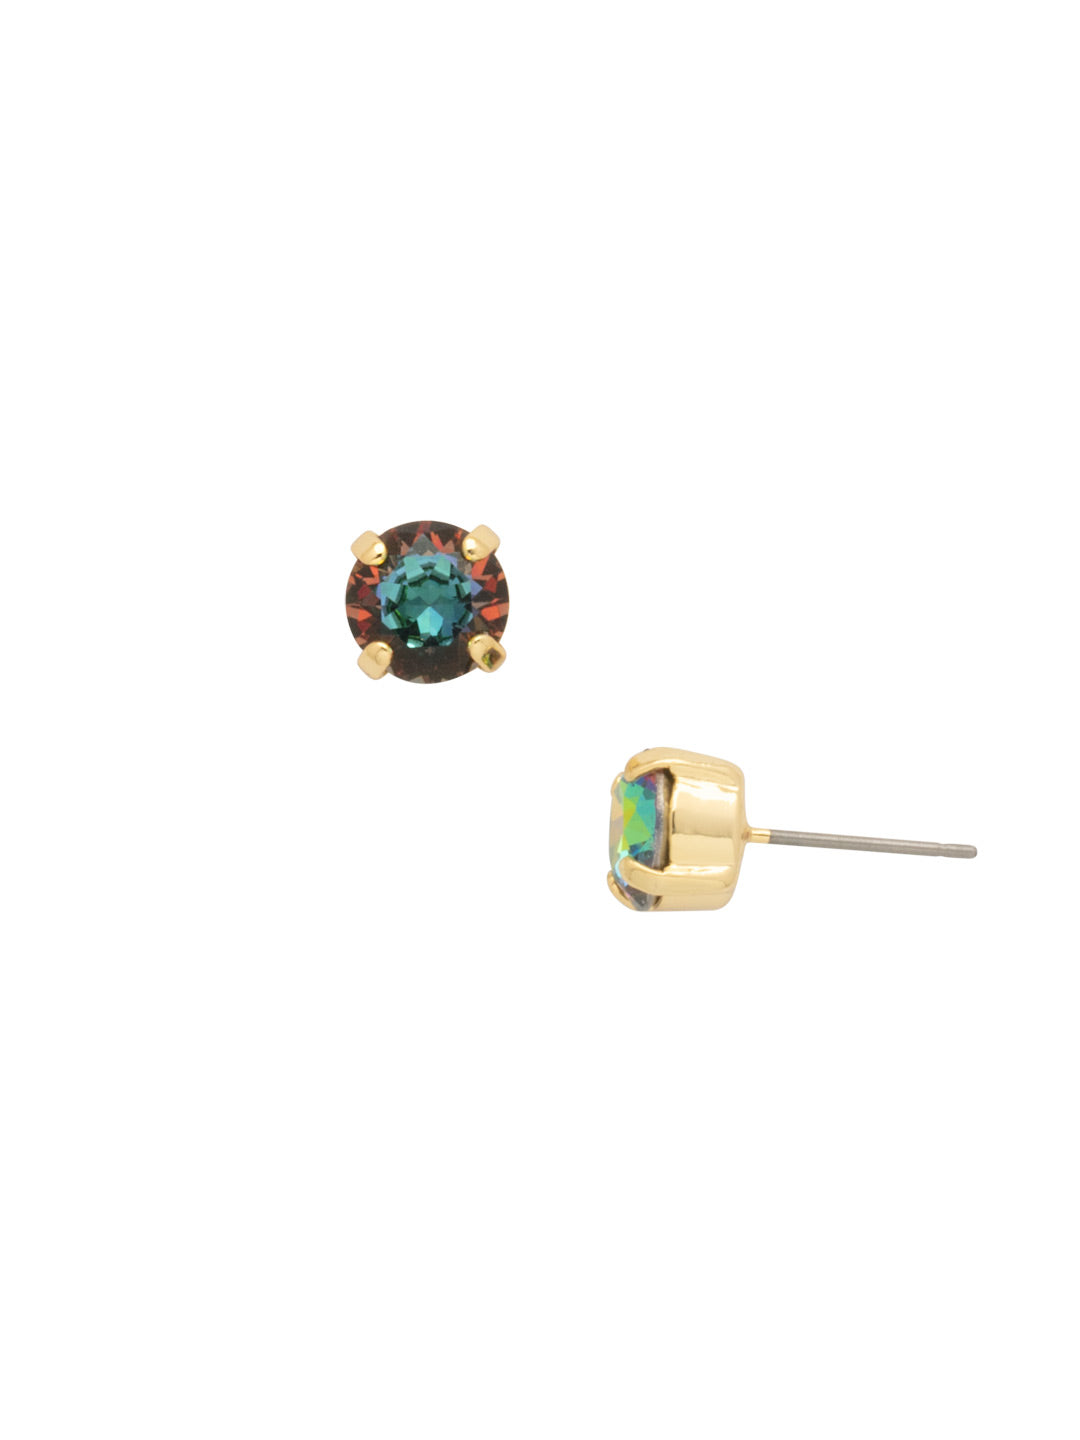 Simple Stud Earrings - EFC99BGVO - <p>The Simple Stud Earrings feature a single solid crystal on a surgical steel post, creating a small but sparkly everyday staple! Need help picking a stud? <a href="https://www.sorrelli.com/blogs/sisterhood/round-stud-earrings-101-a-rundown-of-sizes-styles-and-sparkle">Check out our size guide!</a> From Sorrelli's Volcano collection in our Bright Gold-tone finish.</p>